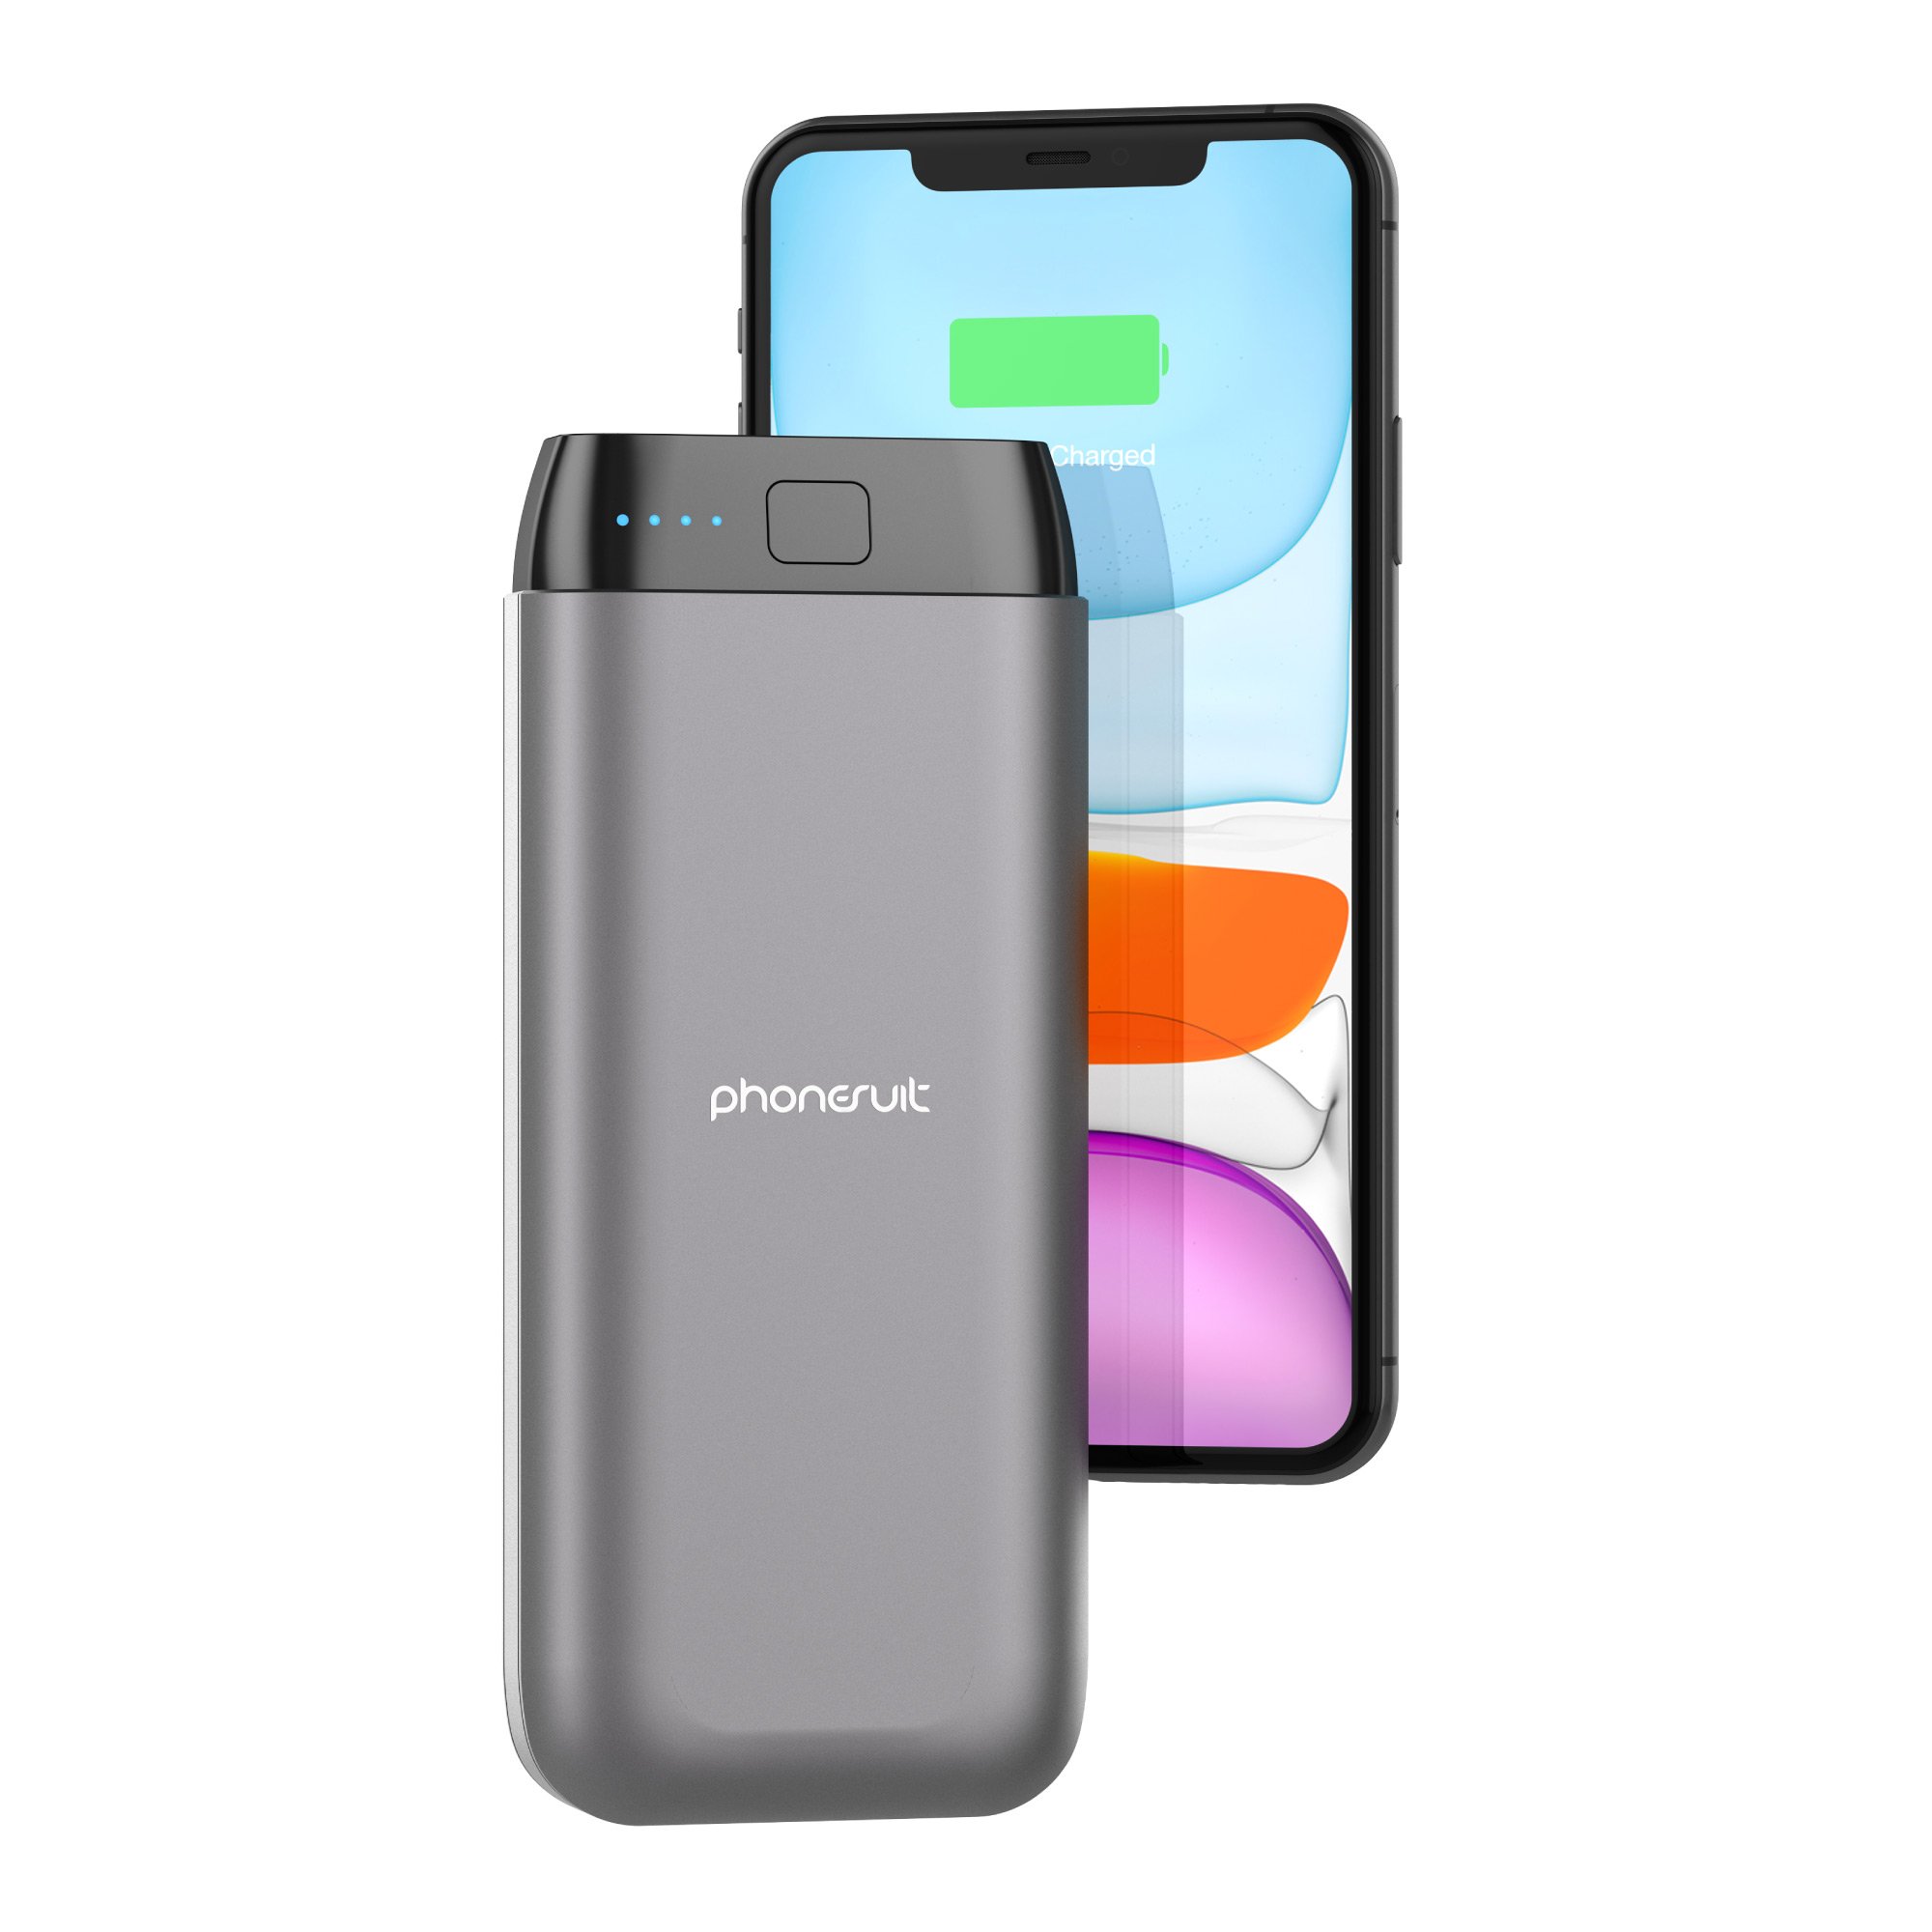 PhoneSuit Energy Core Max Power Bank 20,000mAh for iPhone, SAMSUNG and More - image 1 of 6